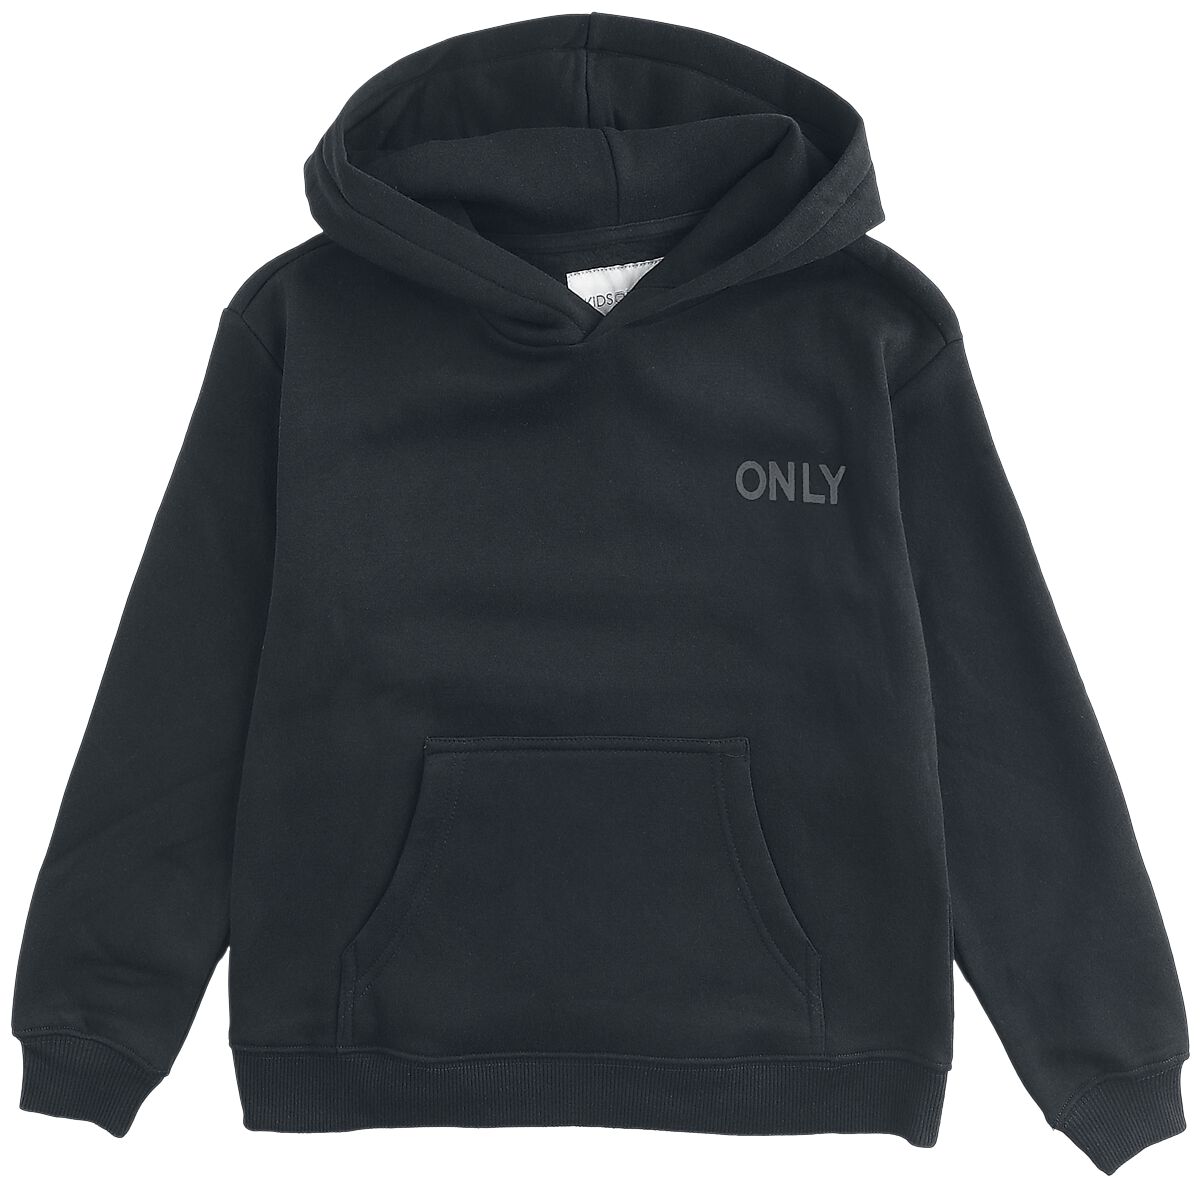 Kids Only Every Life Small Logo Hoodie Sweater black